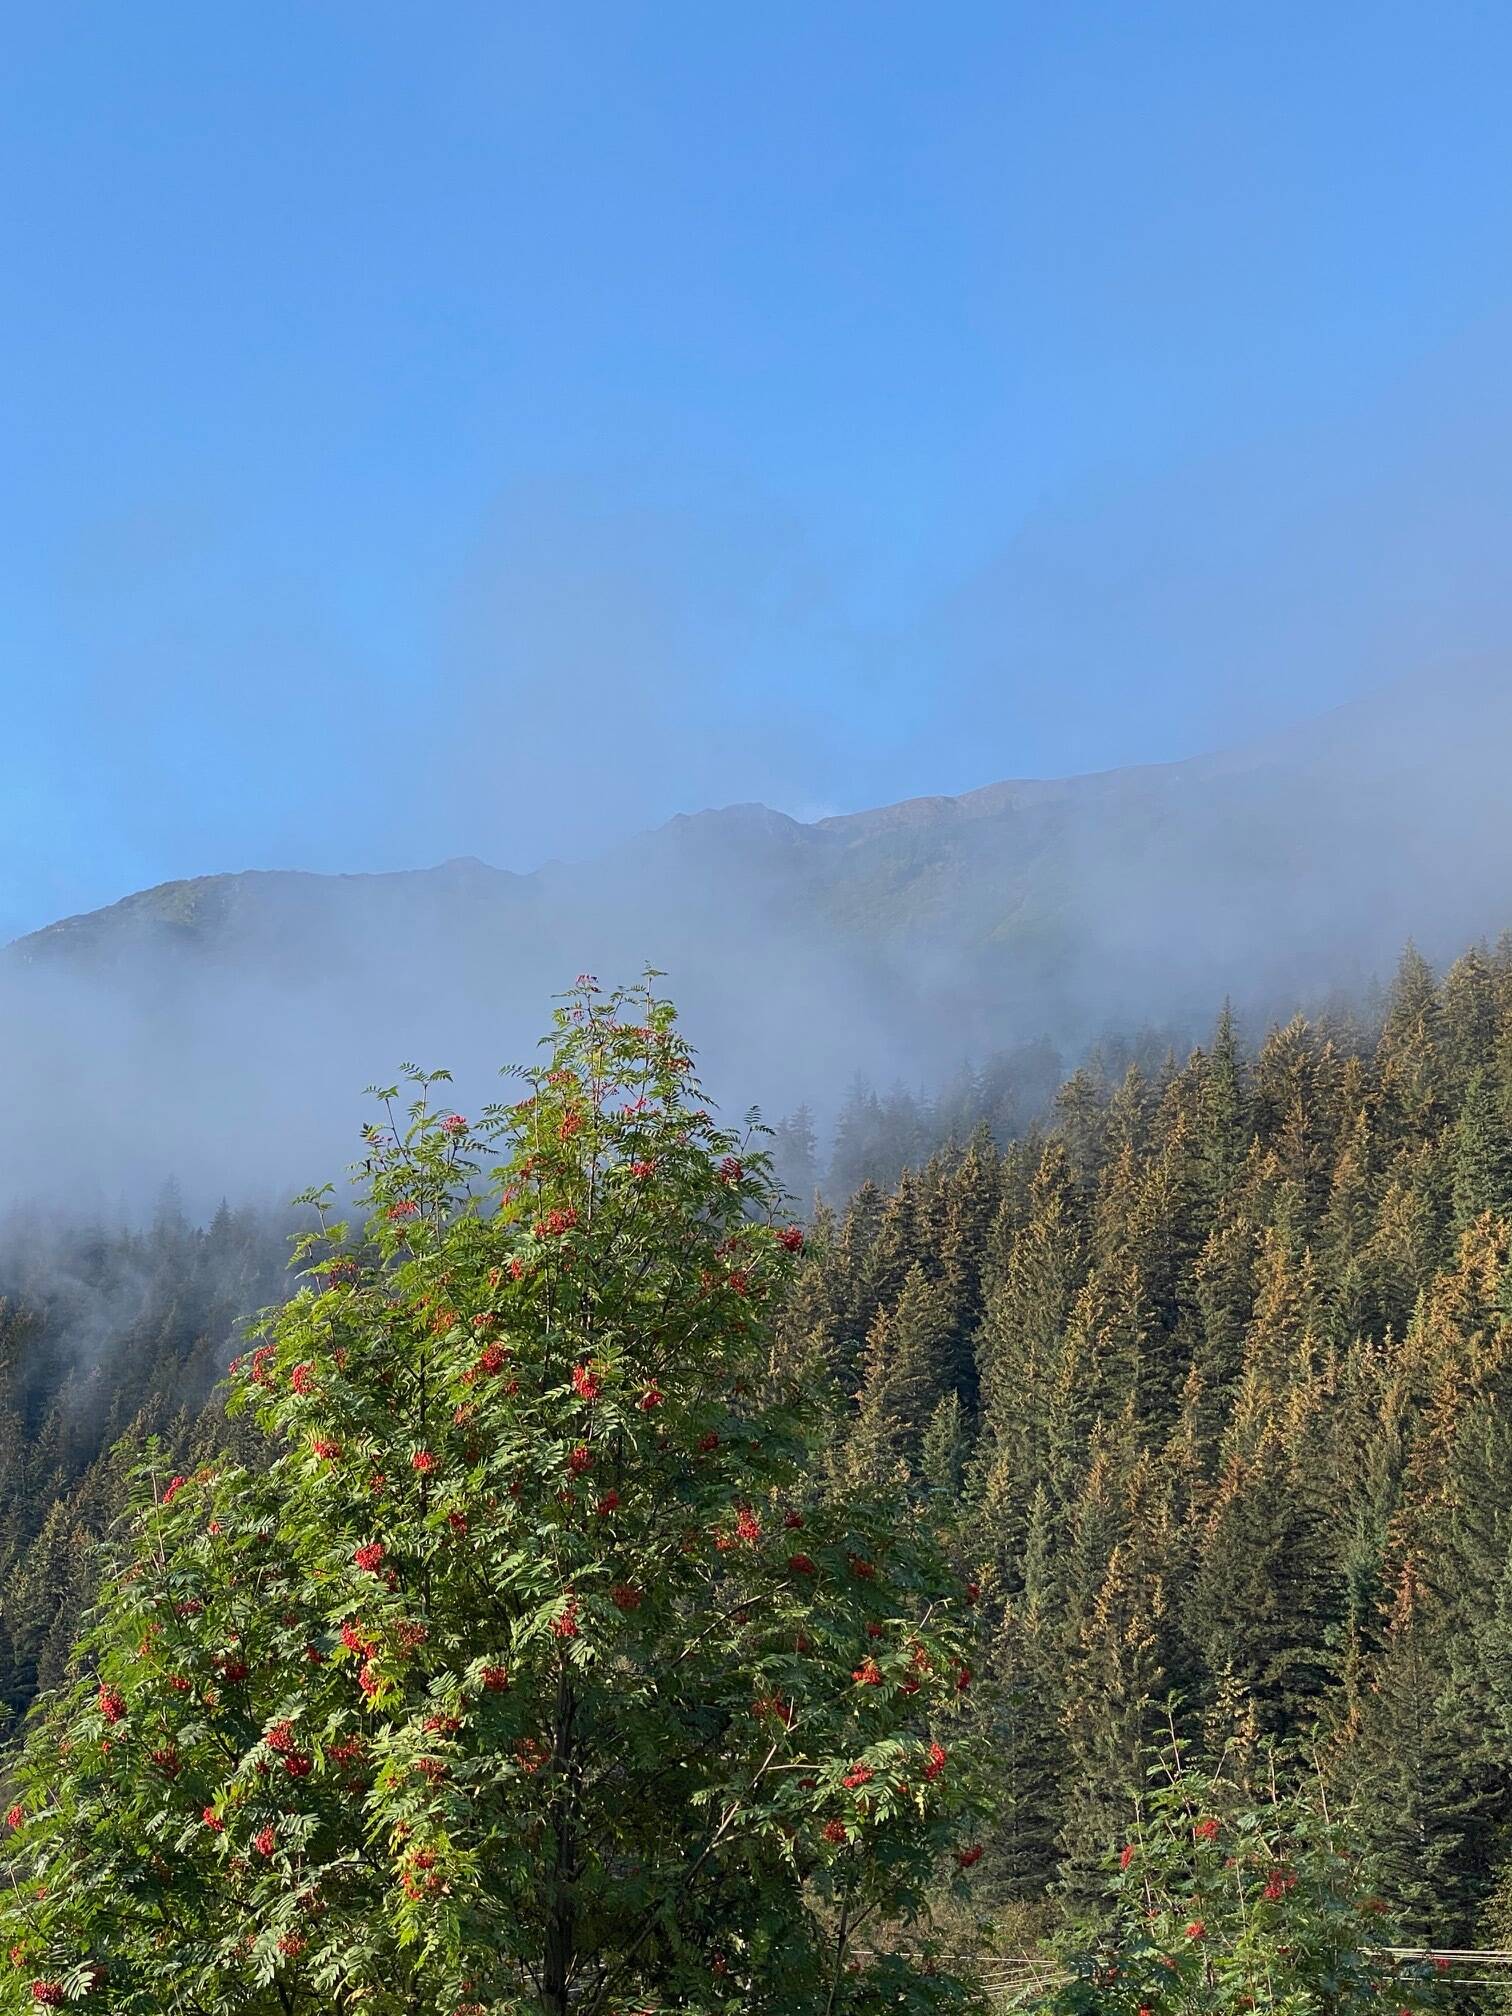 Clouds dissipate over mountain ash and spruce trees in Seward on Sept. 21. (Photo by Denise Carroll)